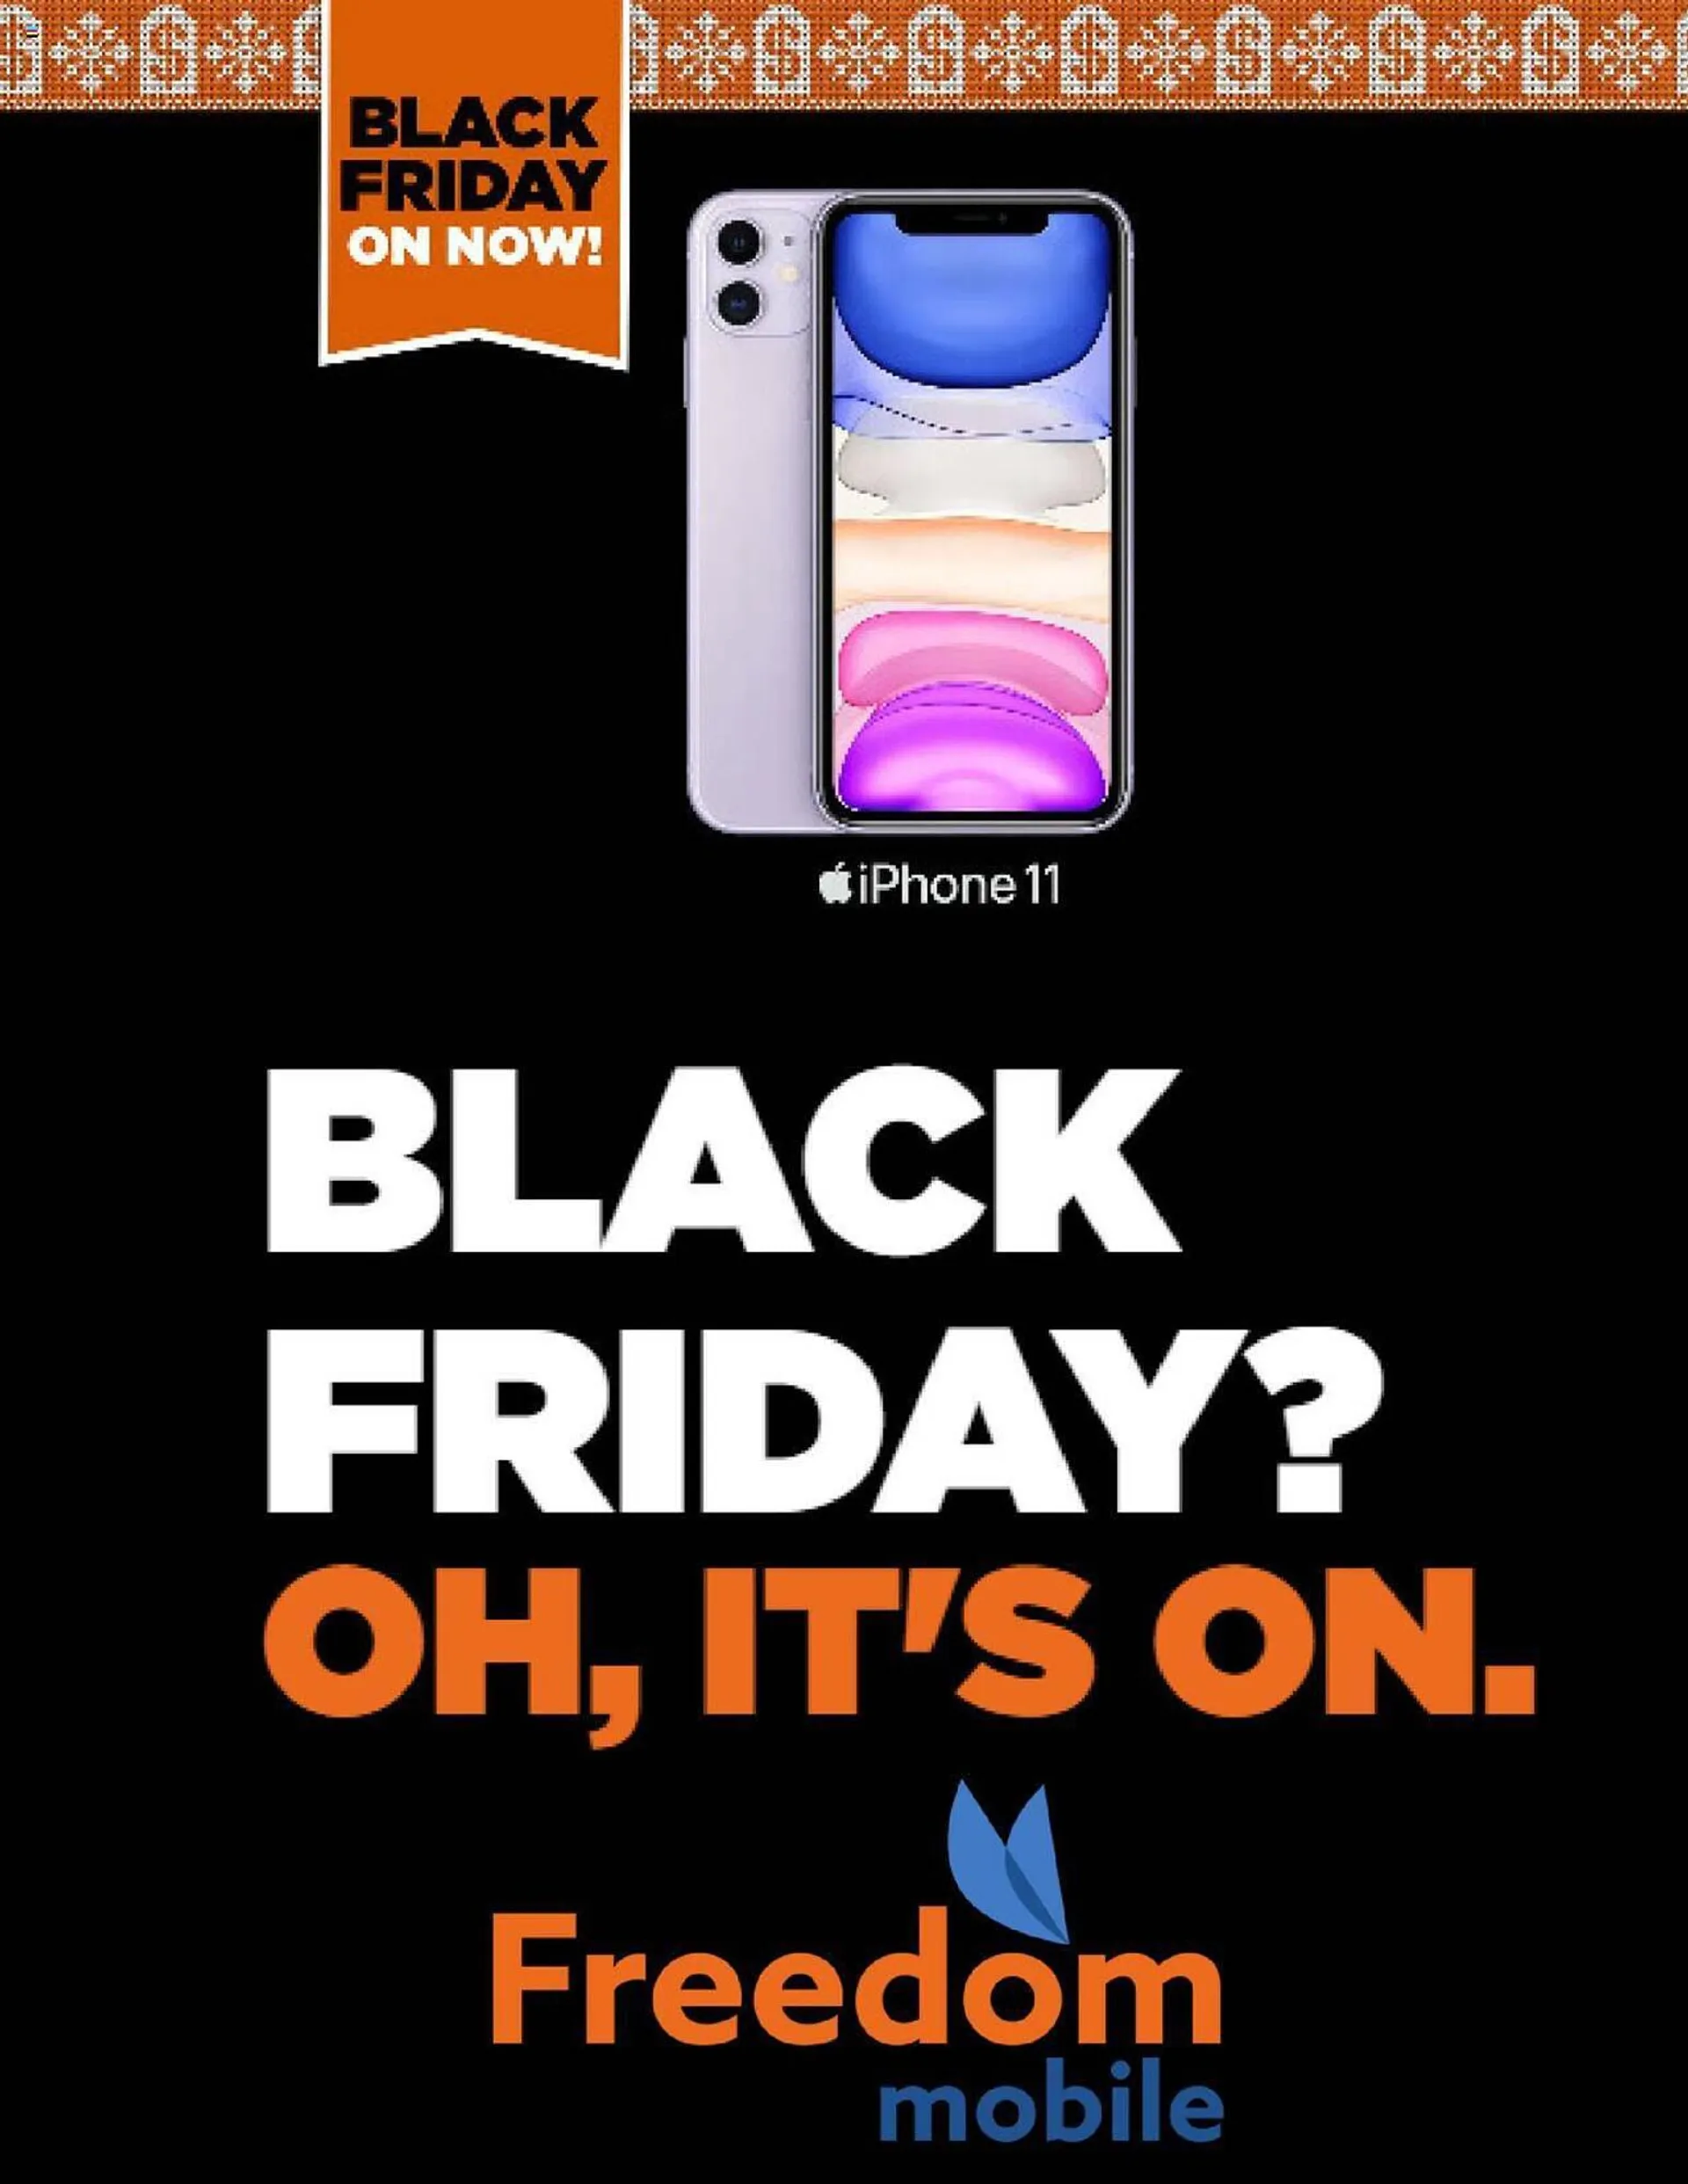 Freedom Mobile flyer - 1